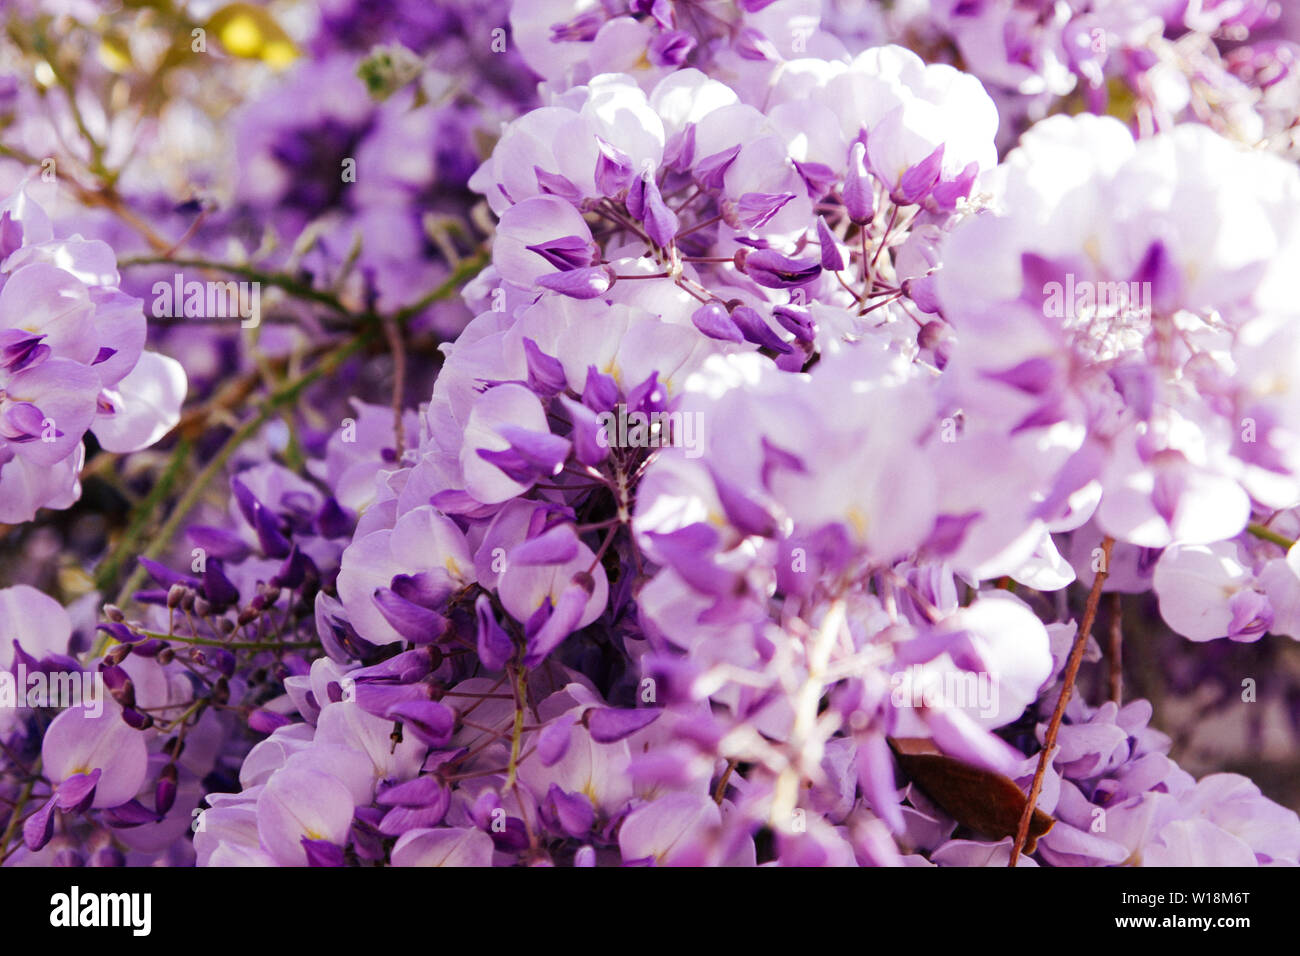 Blossoming wistaria branch in an orchard. Artistic nature wallpaper blurry background with purple flowers wisteria or glycine in springtime. Stock Photo